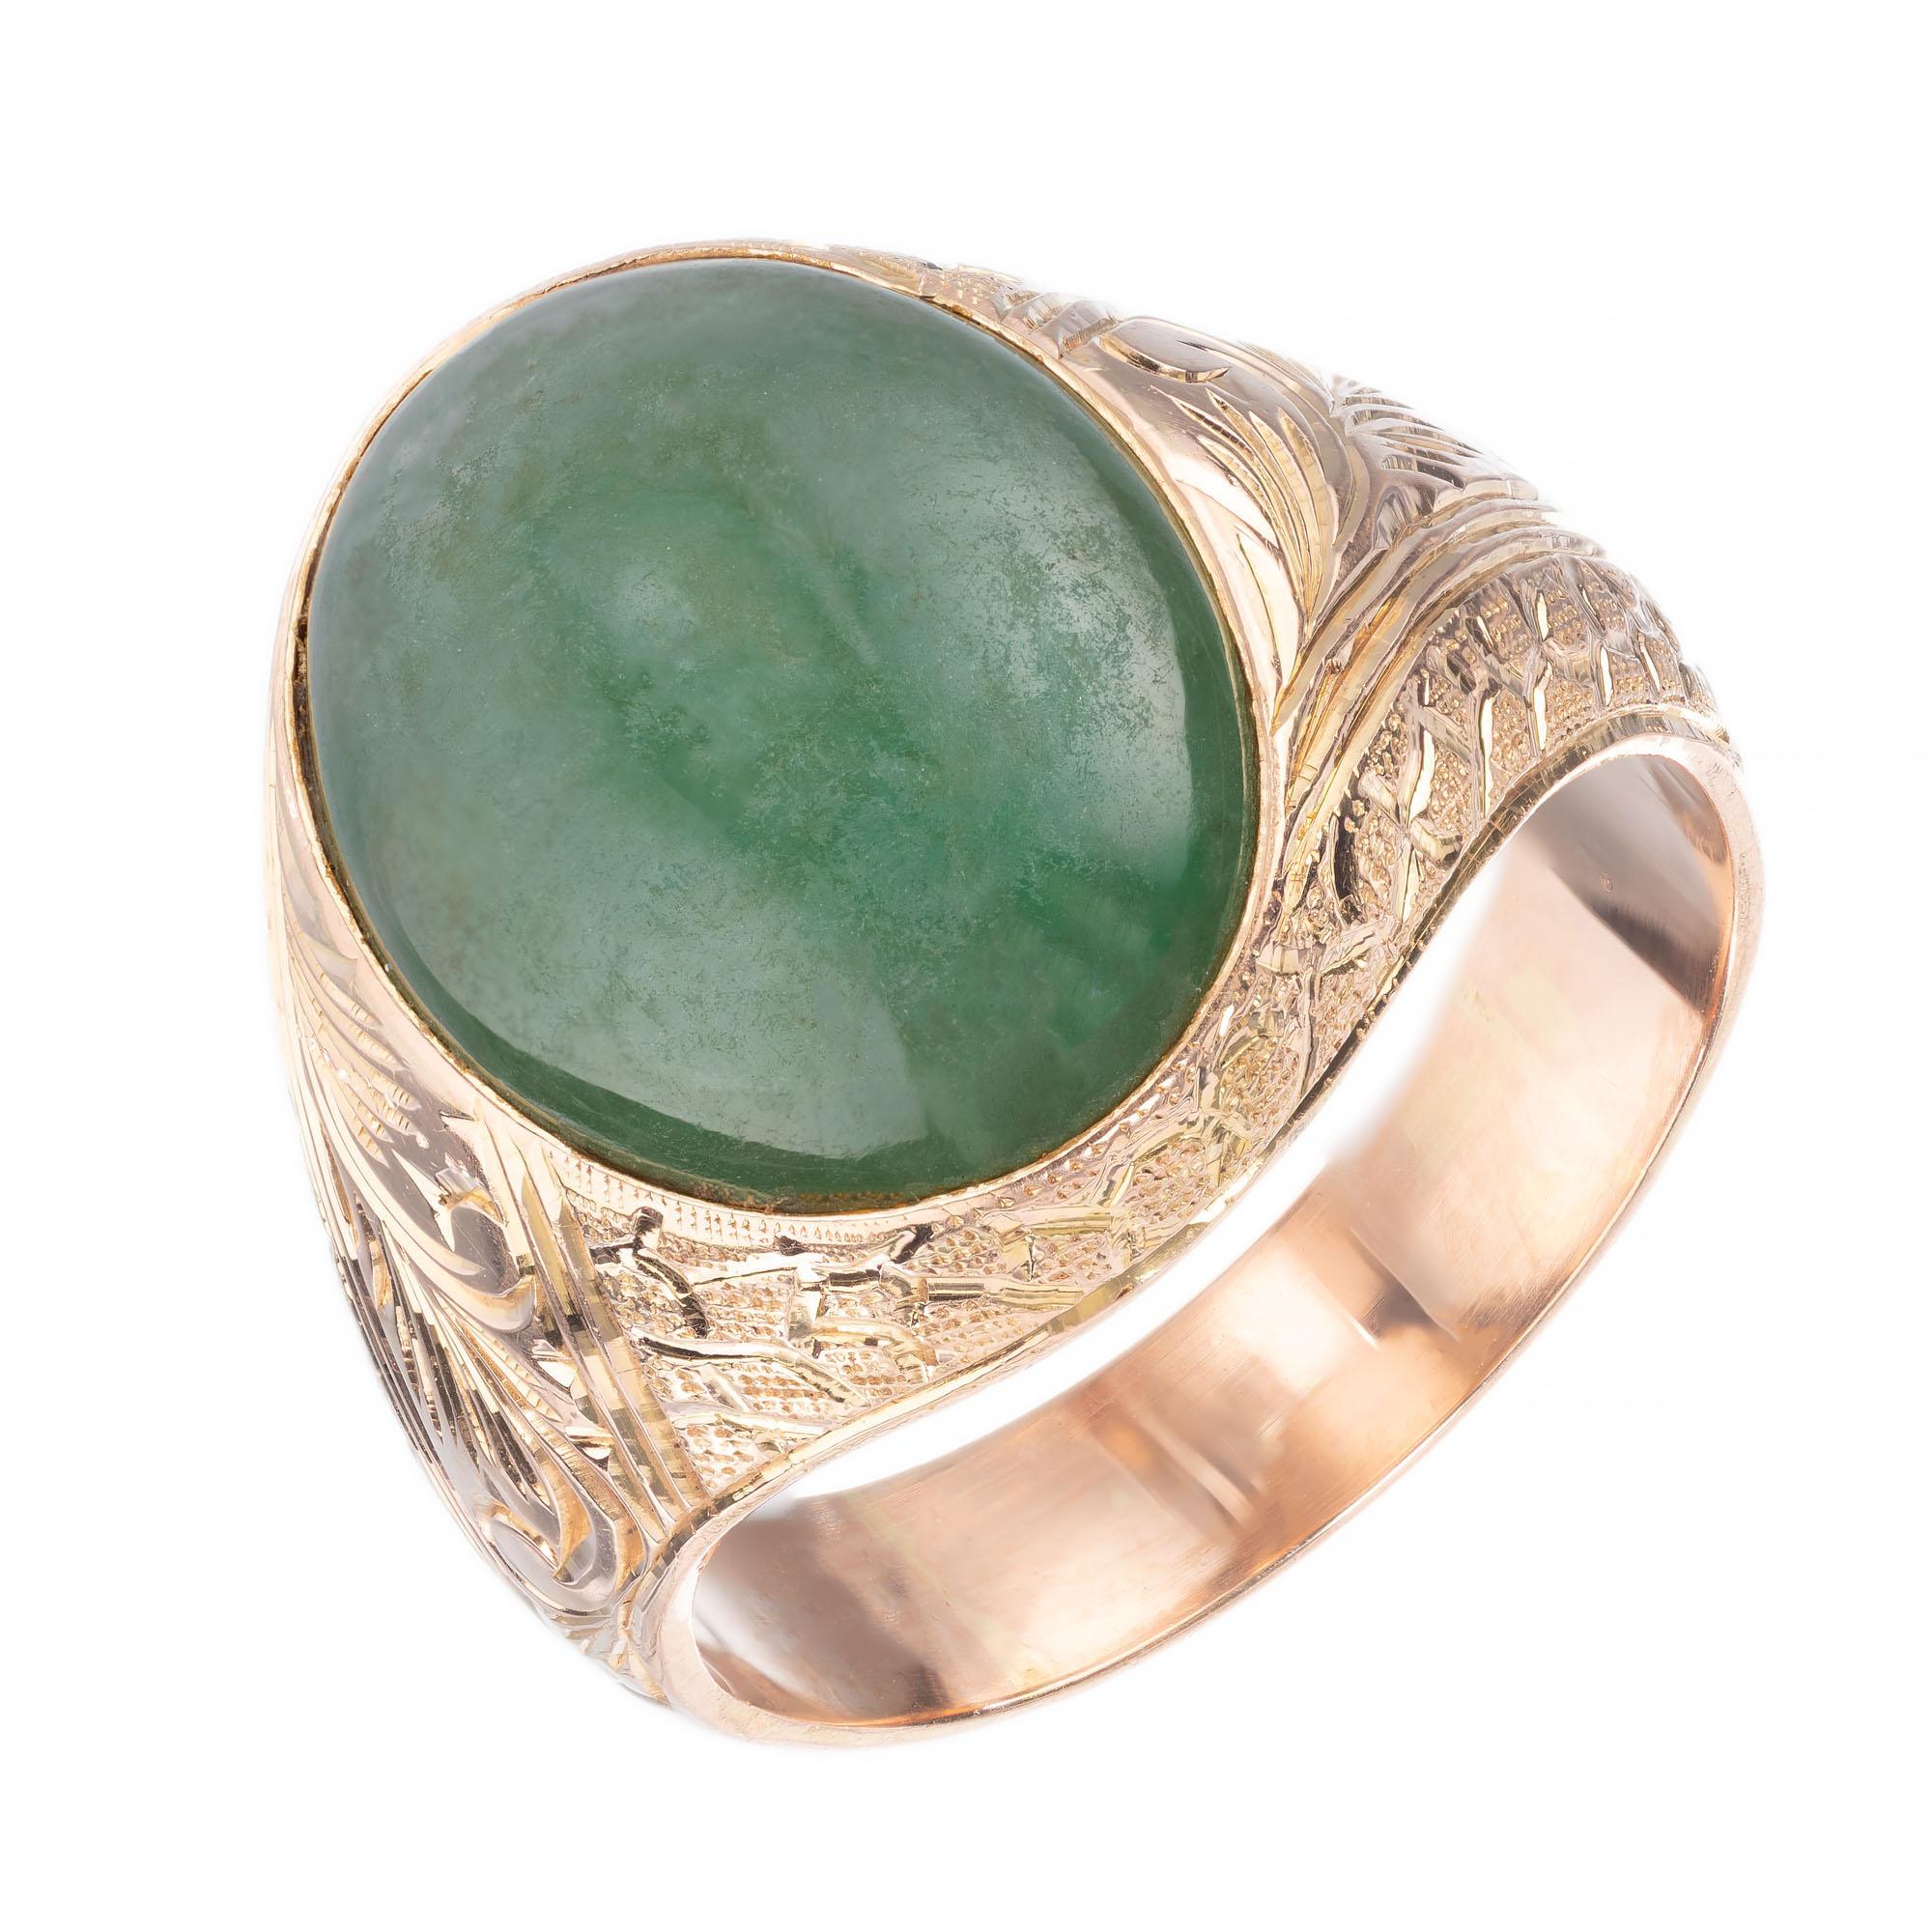 GIA certified Oval jadeite jade center stone in a handmade hand engraved 14k rose gold setting.  

1 oval green translucent Jadeite Jade, GIA Certificate # 1186037918
Size 8.75 and sizable
14k rose gold 
Stamped: 585
8.2 grams
Width at top: